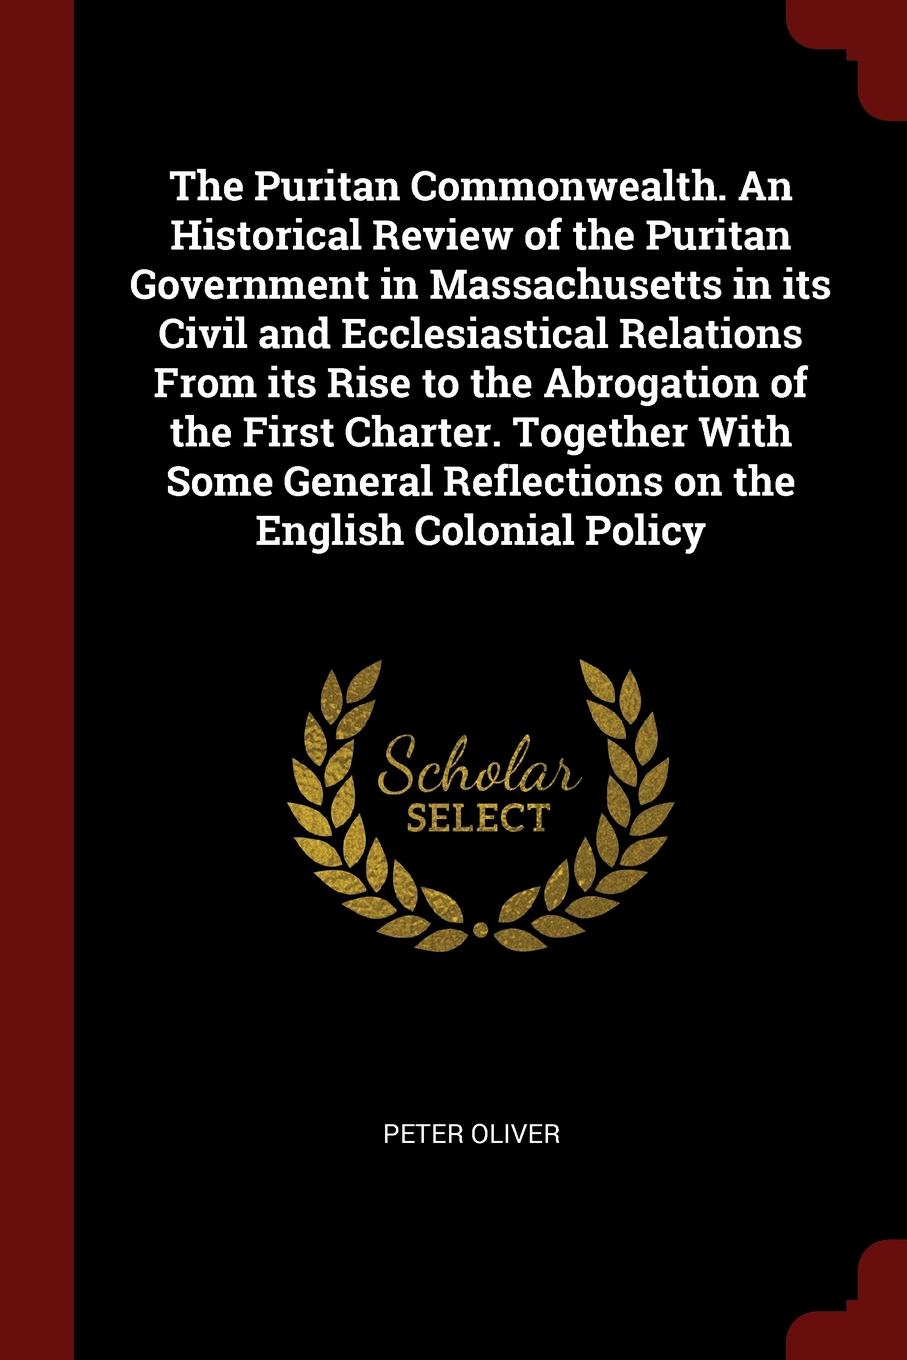 The Puritan Commonwealth. An Historical Review of the Puritan Government in Massachusetts in its Civil and Ecclesiastical Relations From its Rise to the Abrogation of the First Charter. Together With Some General Reflections on the English Colonia...